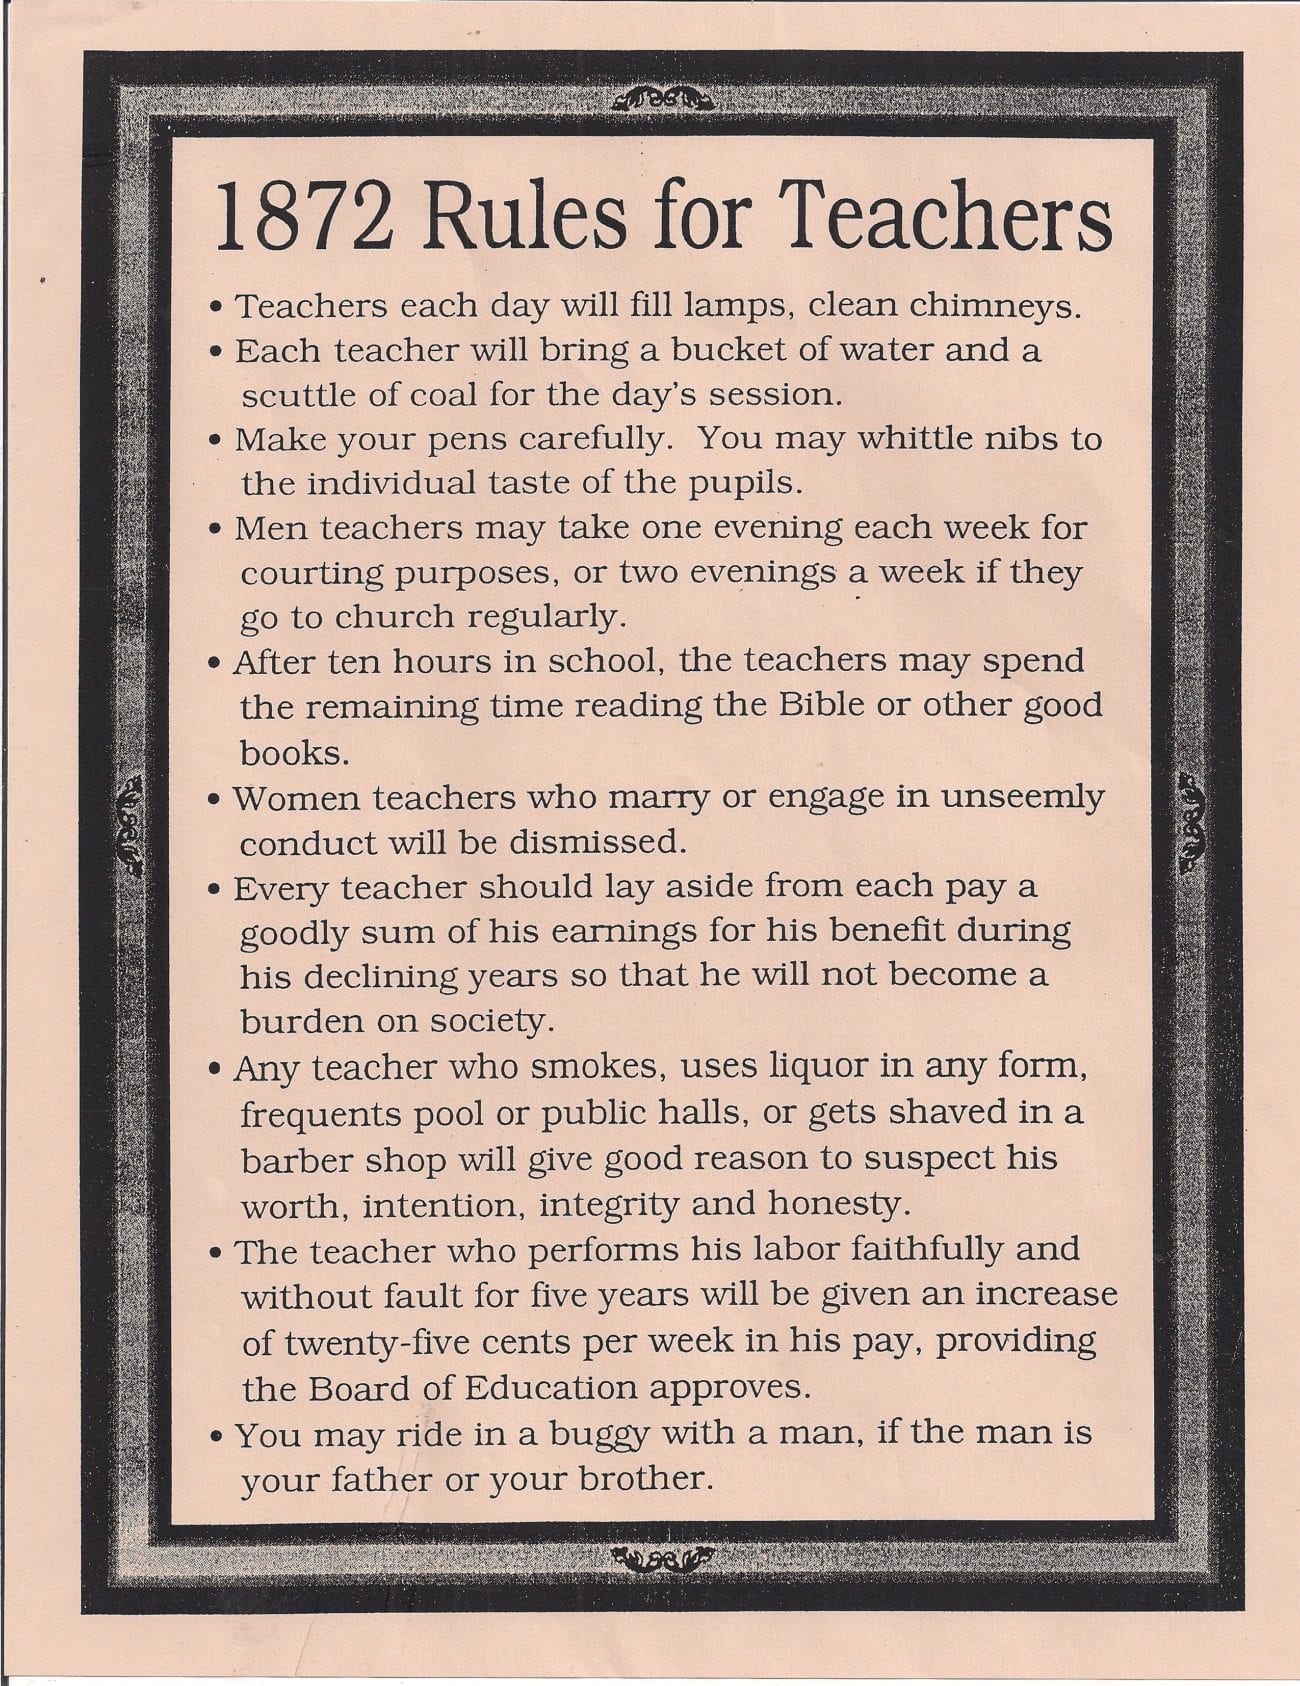 List of teacher rules from 1872. Found on internet in multiple places. Author unknown.